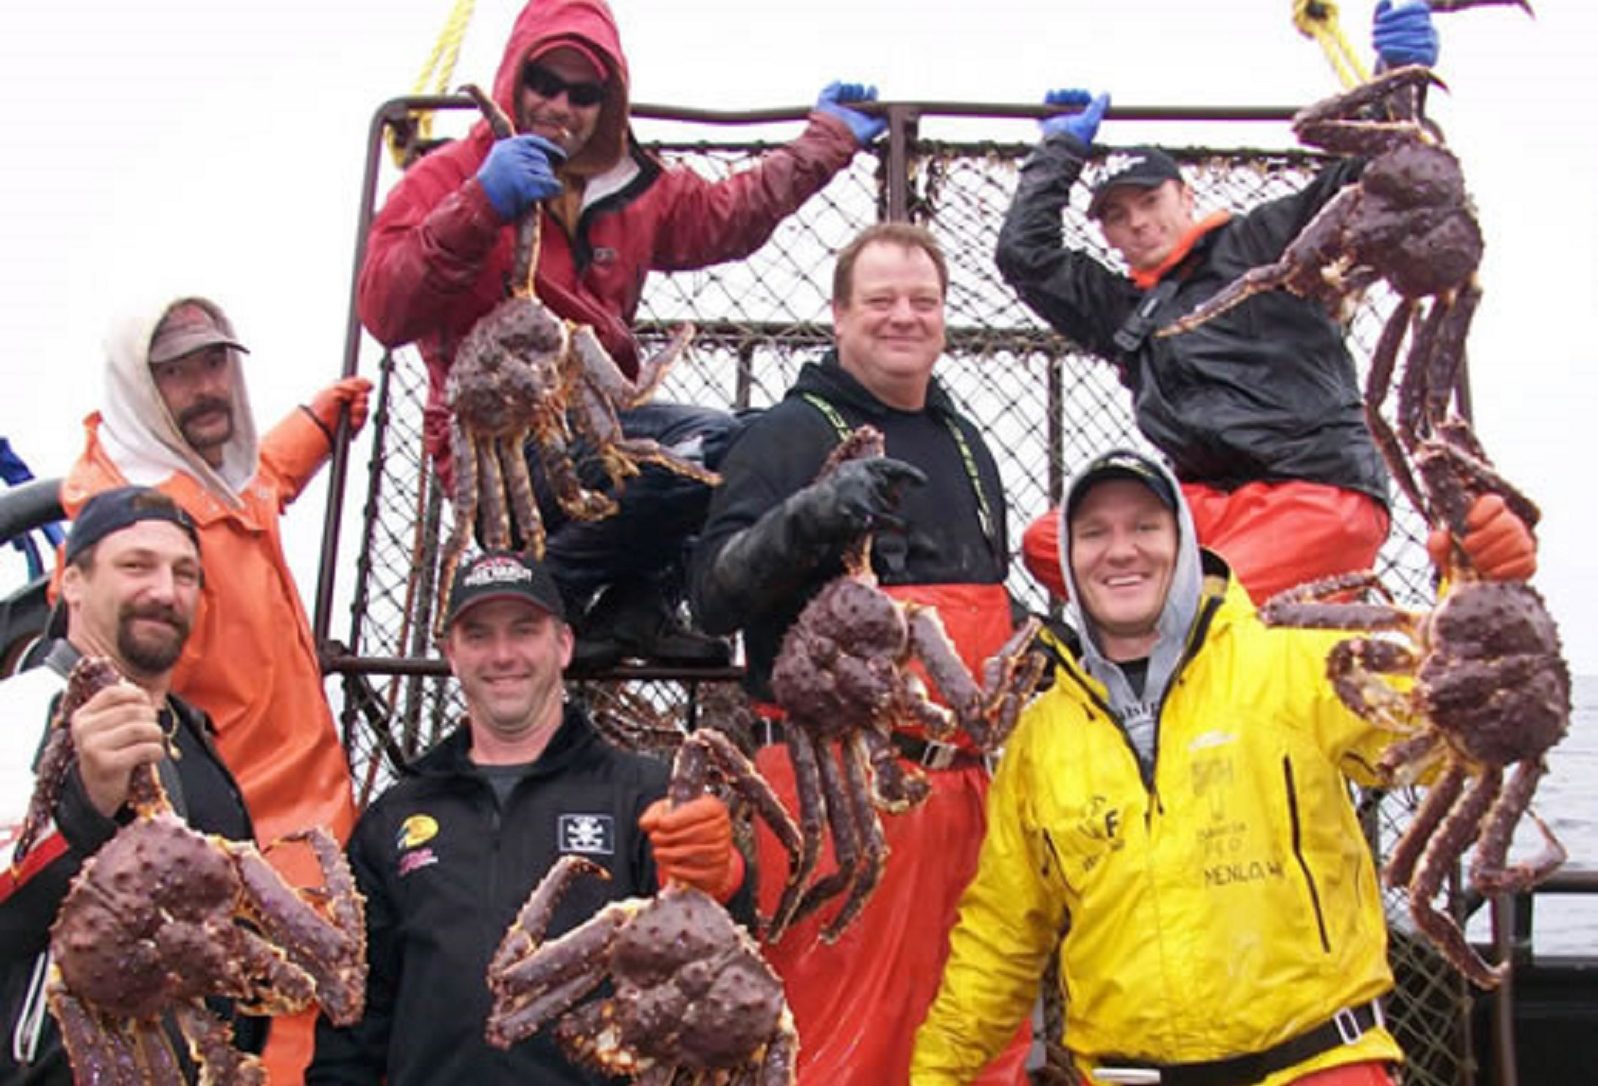 The Unlikely Celebrity: Mike Fourtner and the Deadliest Catch